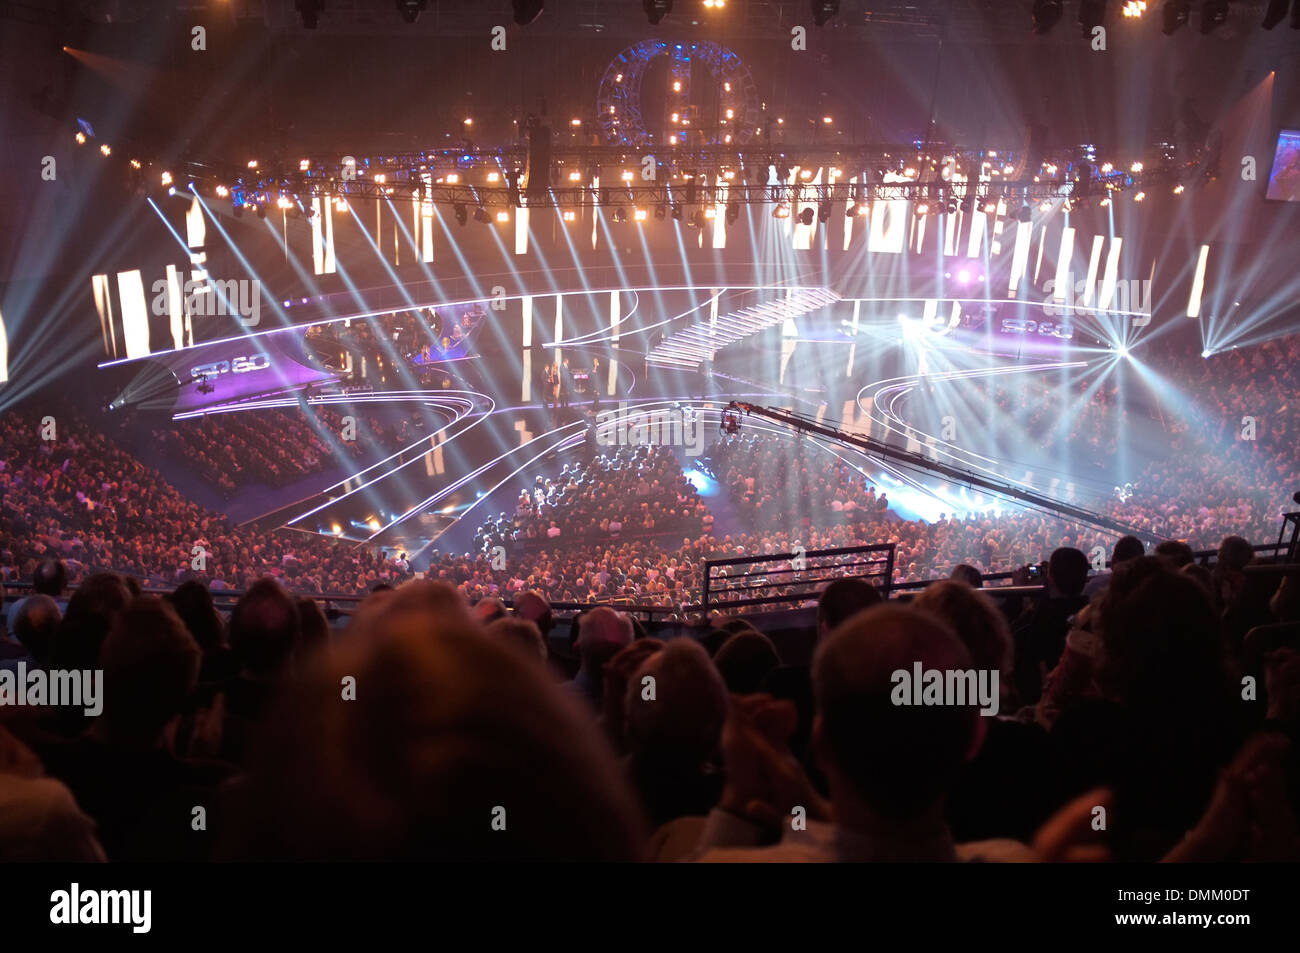 Leeds First Direct Arena hosting the BBC's Sports Personality of the